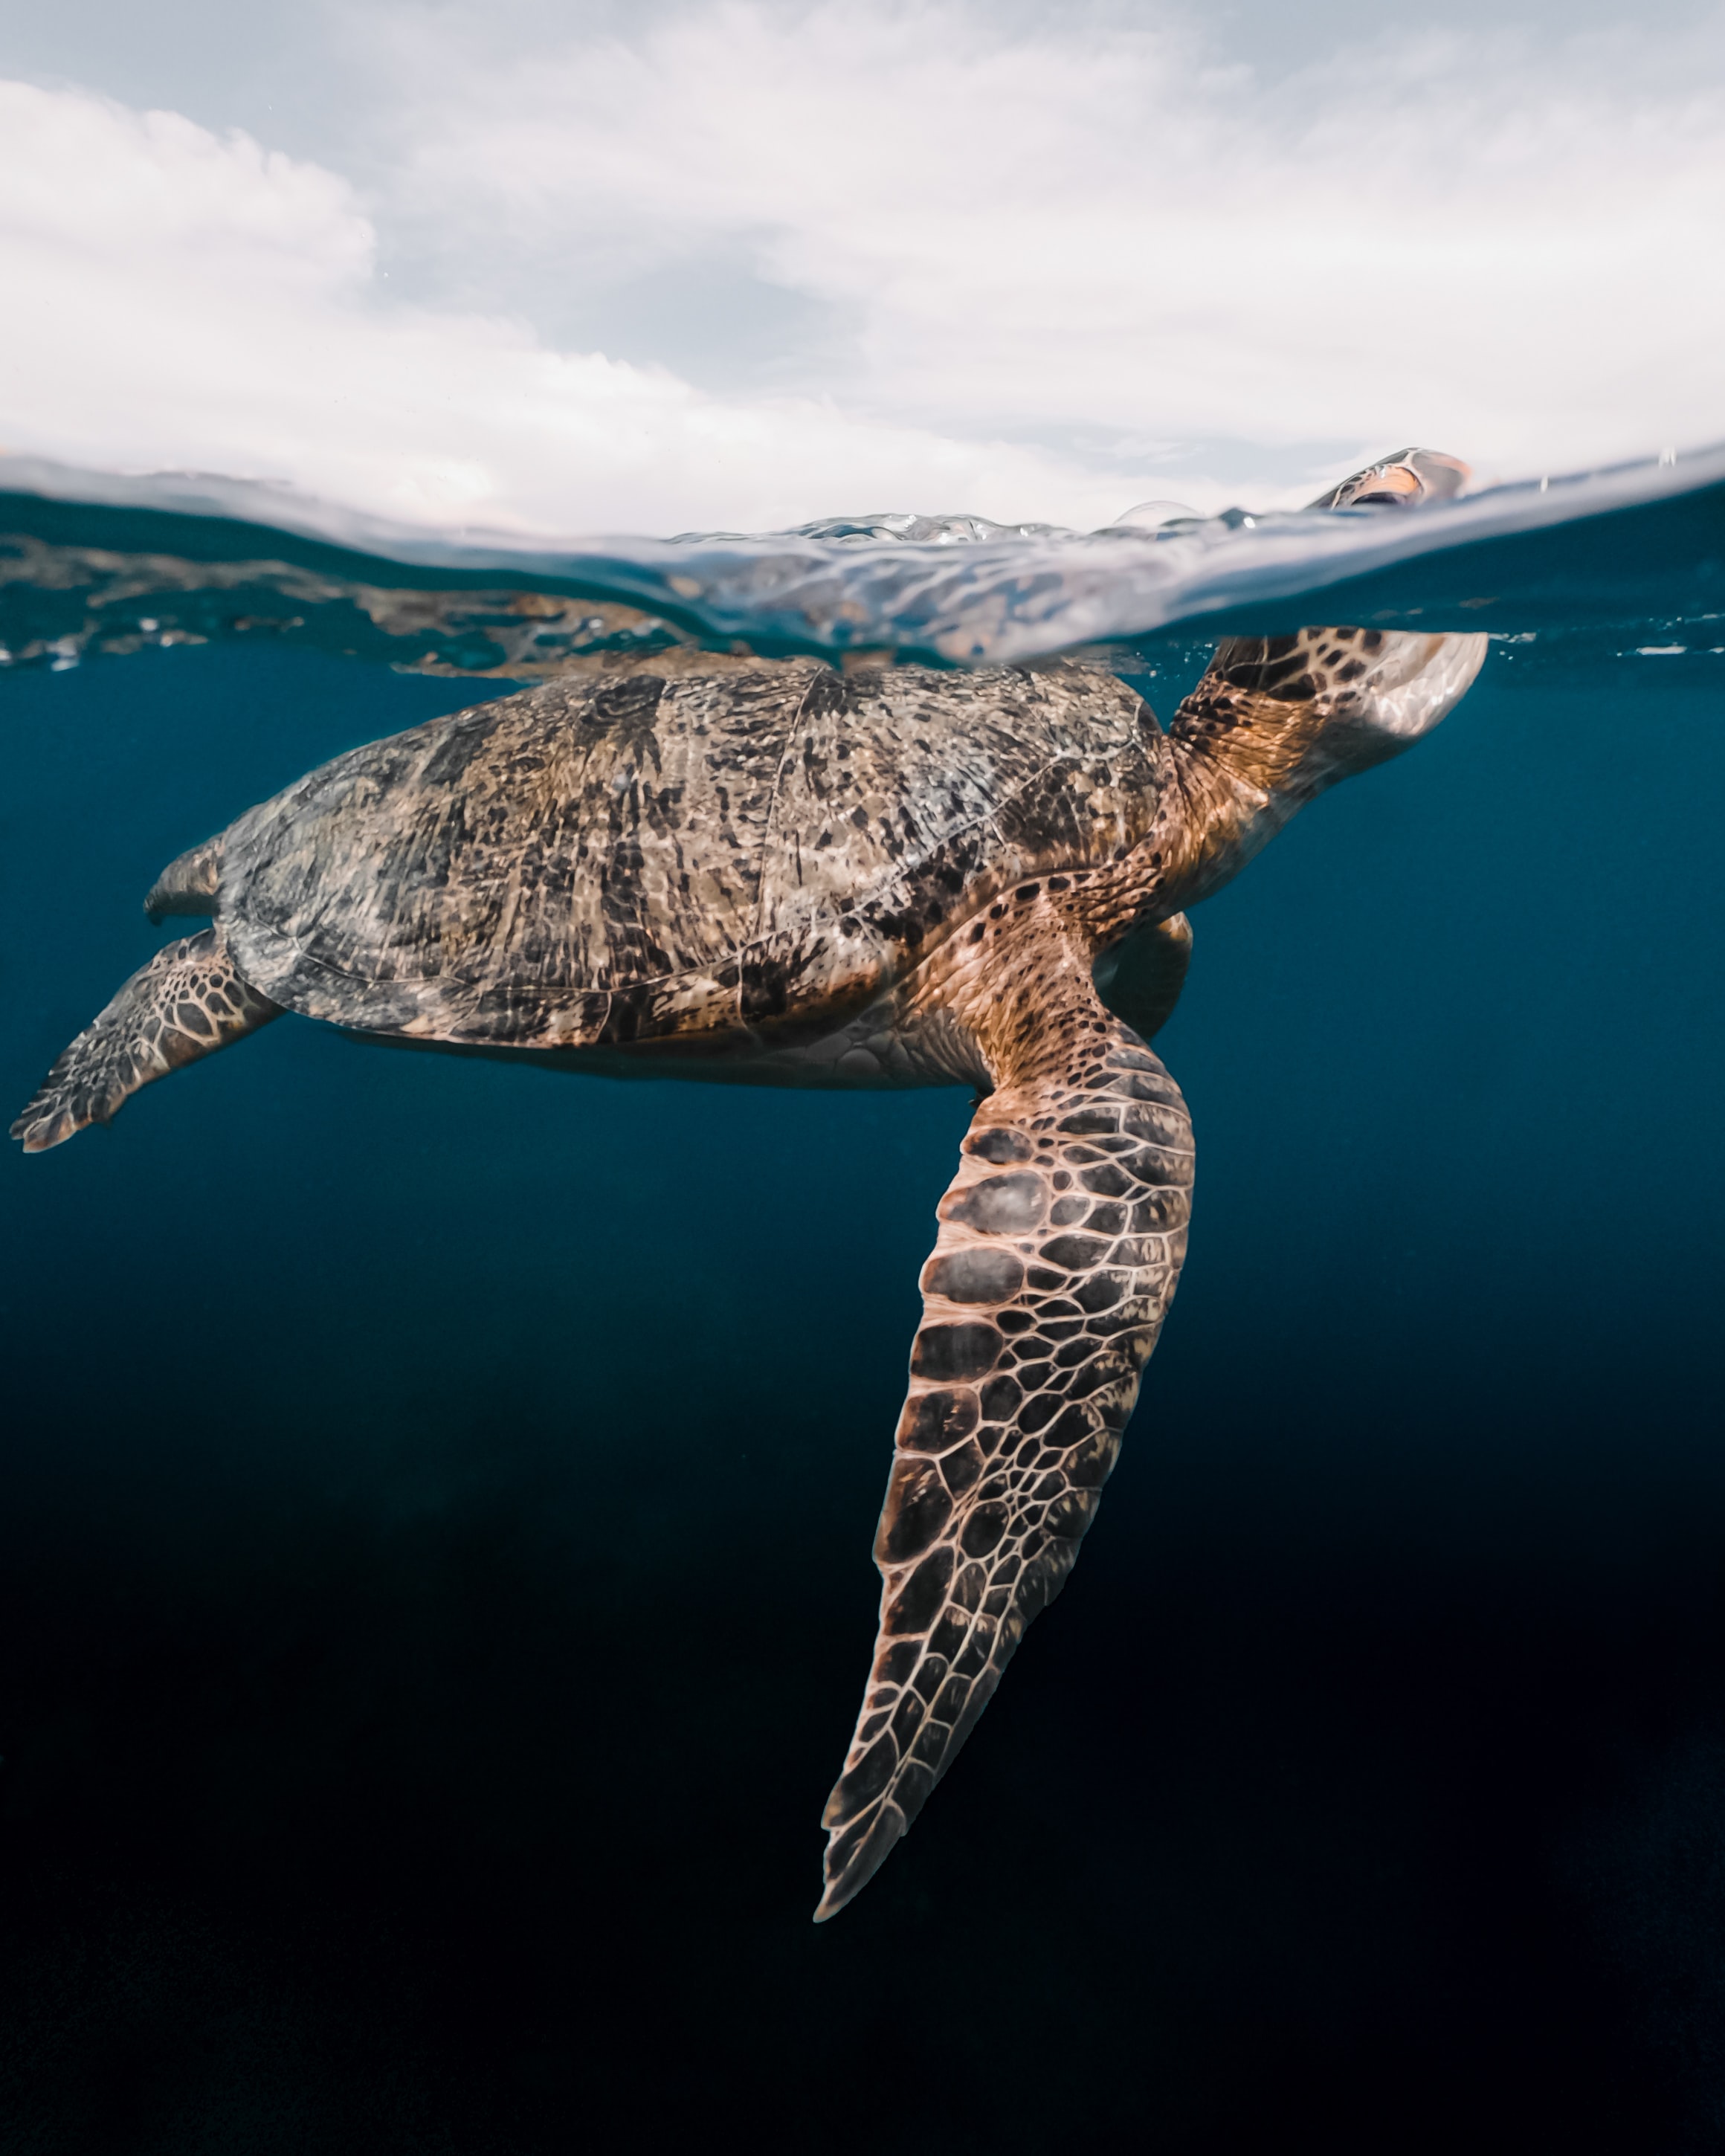 Diving turtle by Victor Ene